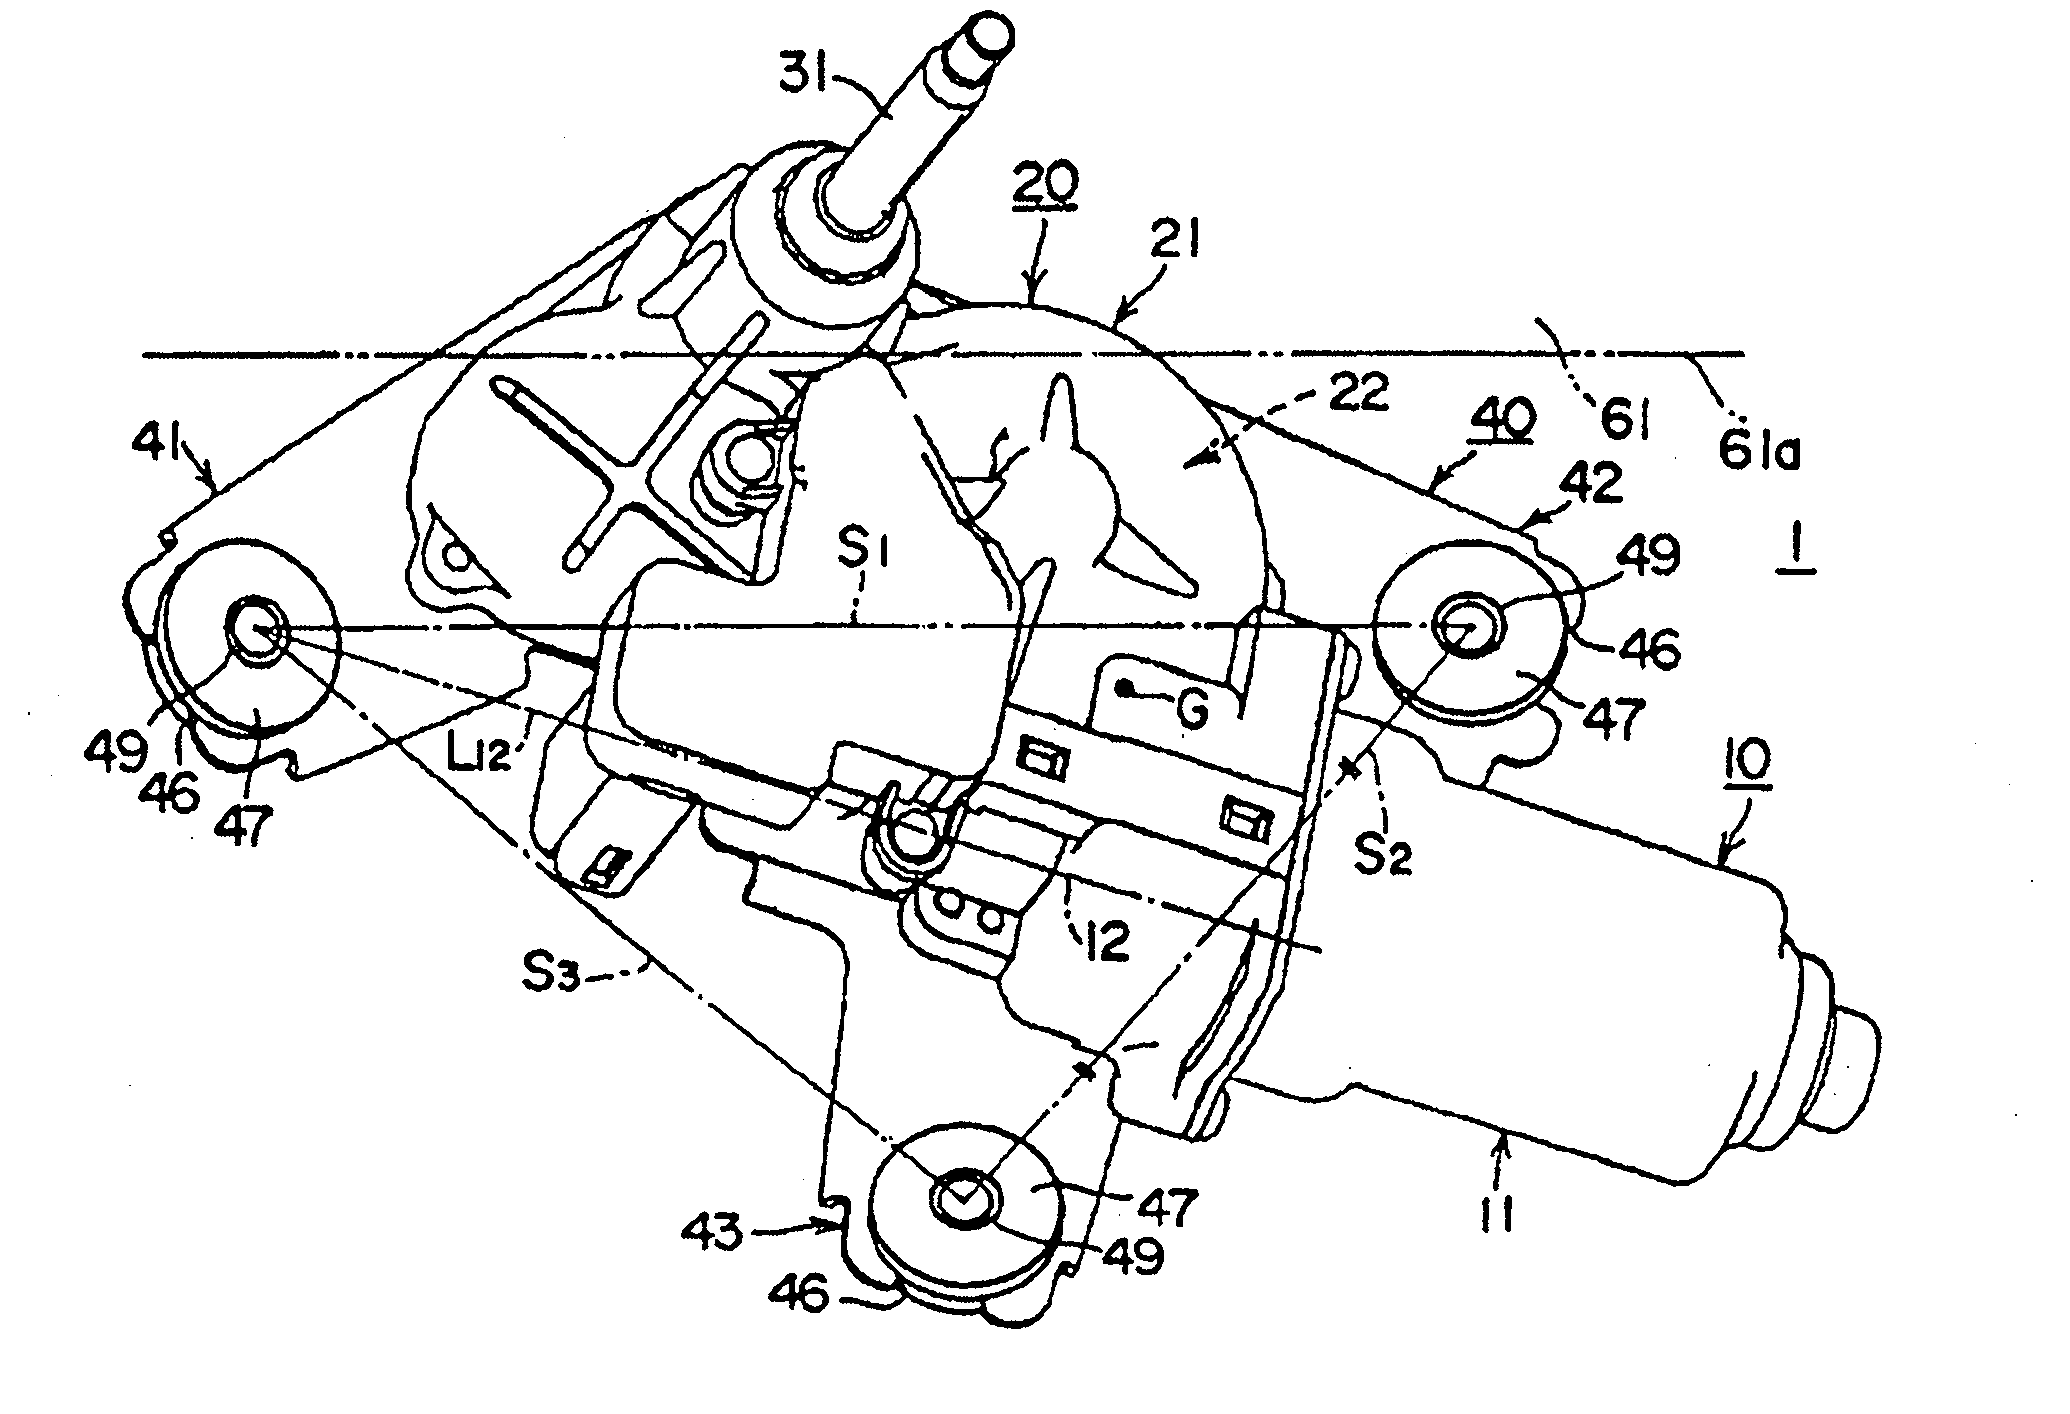 Motor with reduction gear